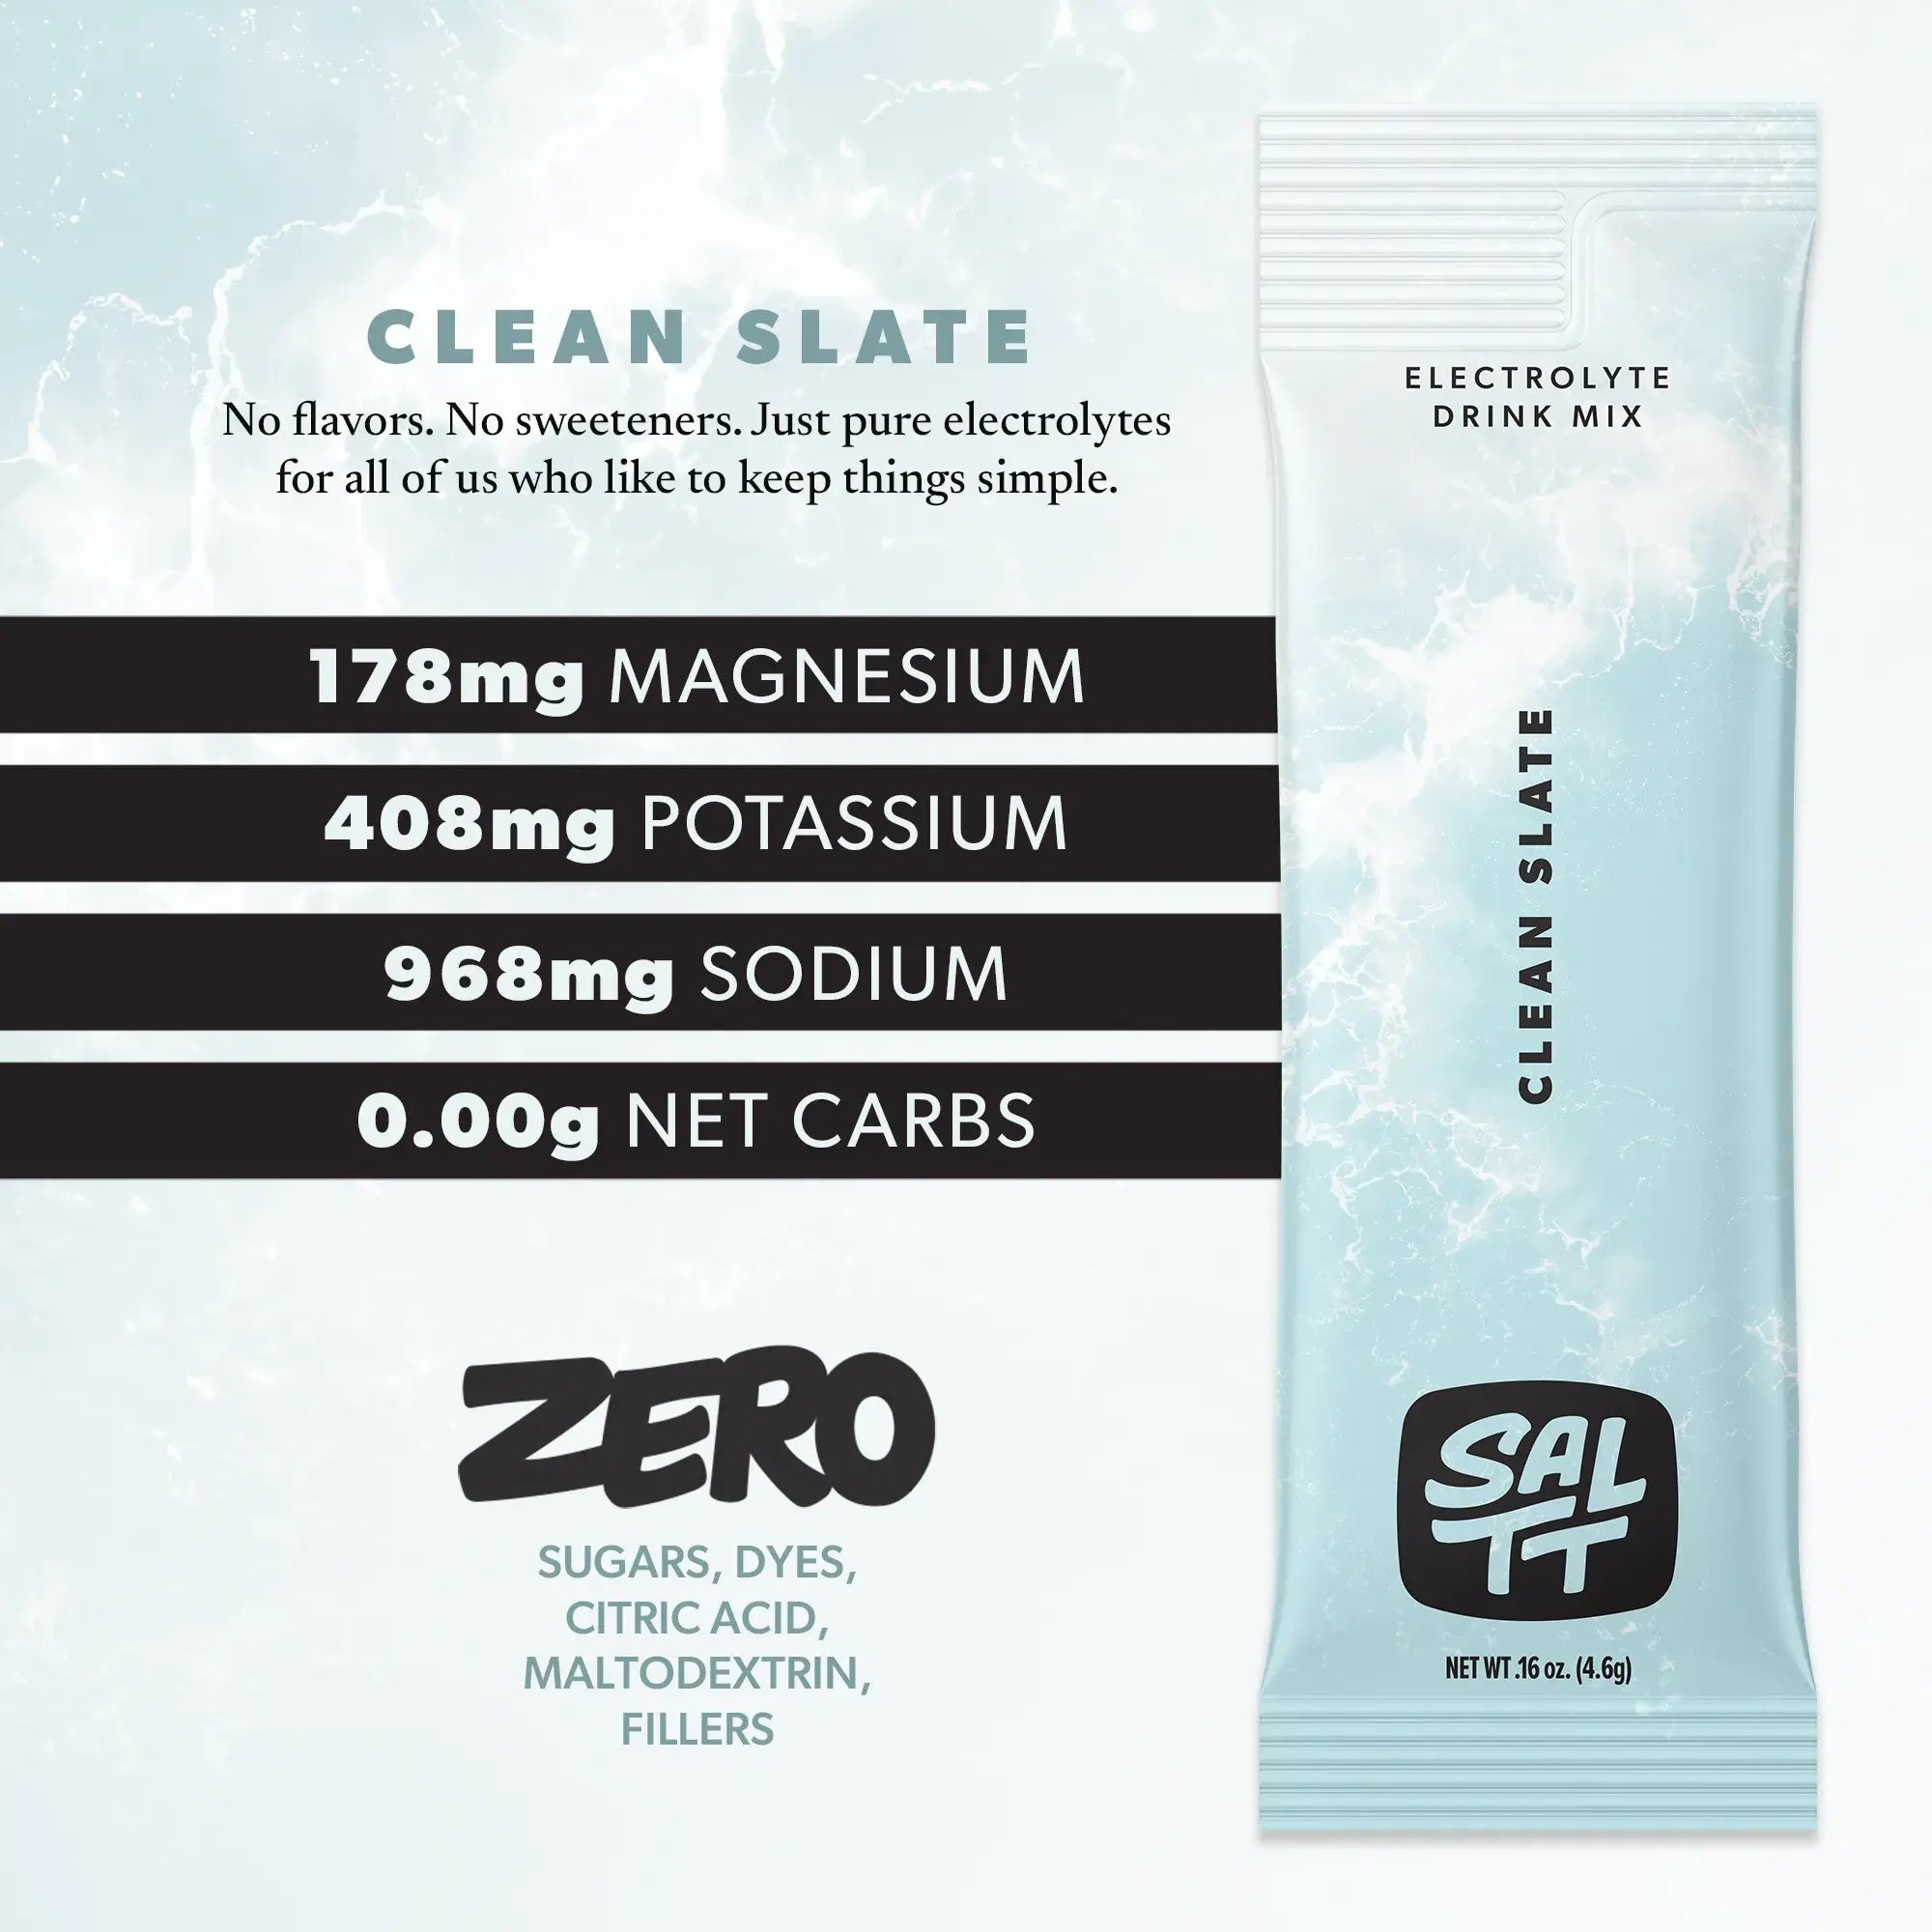 Nutrition for Clean Slate flavor. Clean Slate has 178mg Magnesium, 408mg Potassium, 968mg Sodium, 0.00g net carbs. Zero sugars, dyes, citric acid, maltodextrin, or fillers. See nutrition dropdown for complete supplement facts.